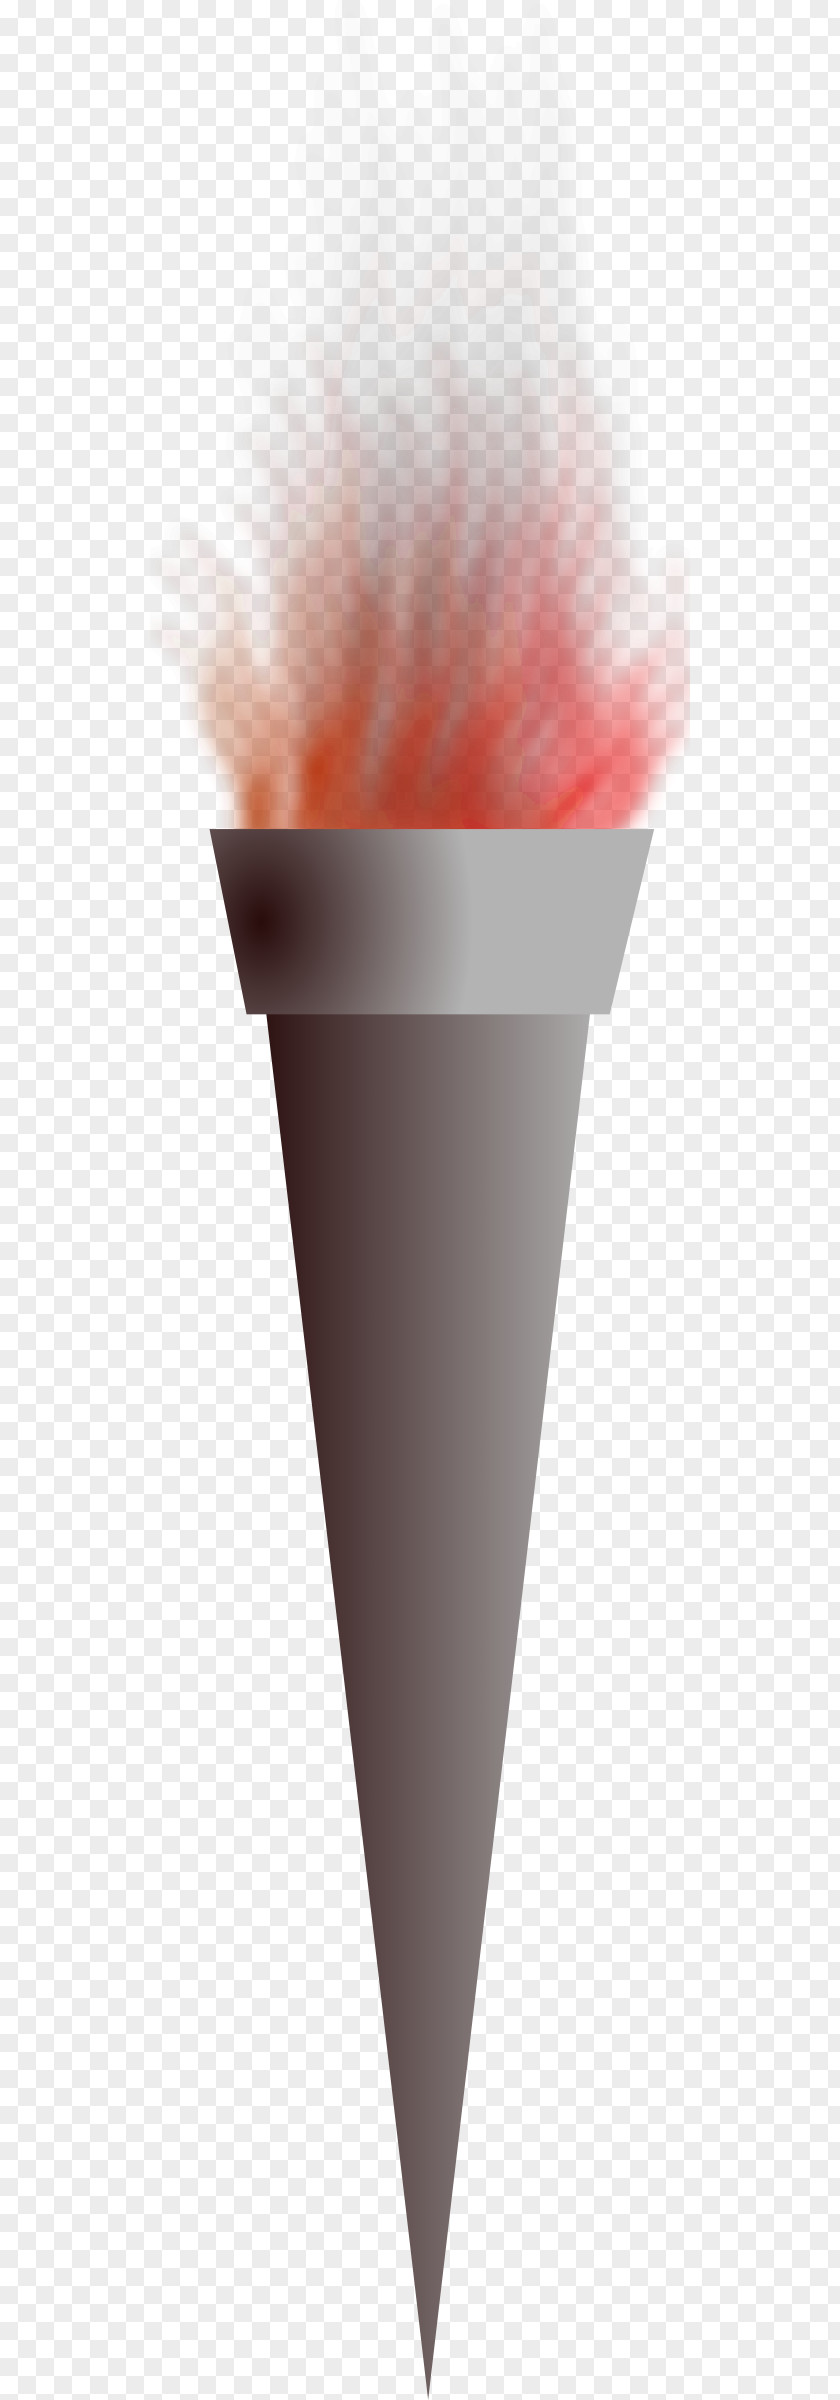 Torch Light Flame PNG